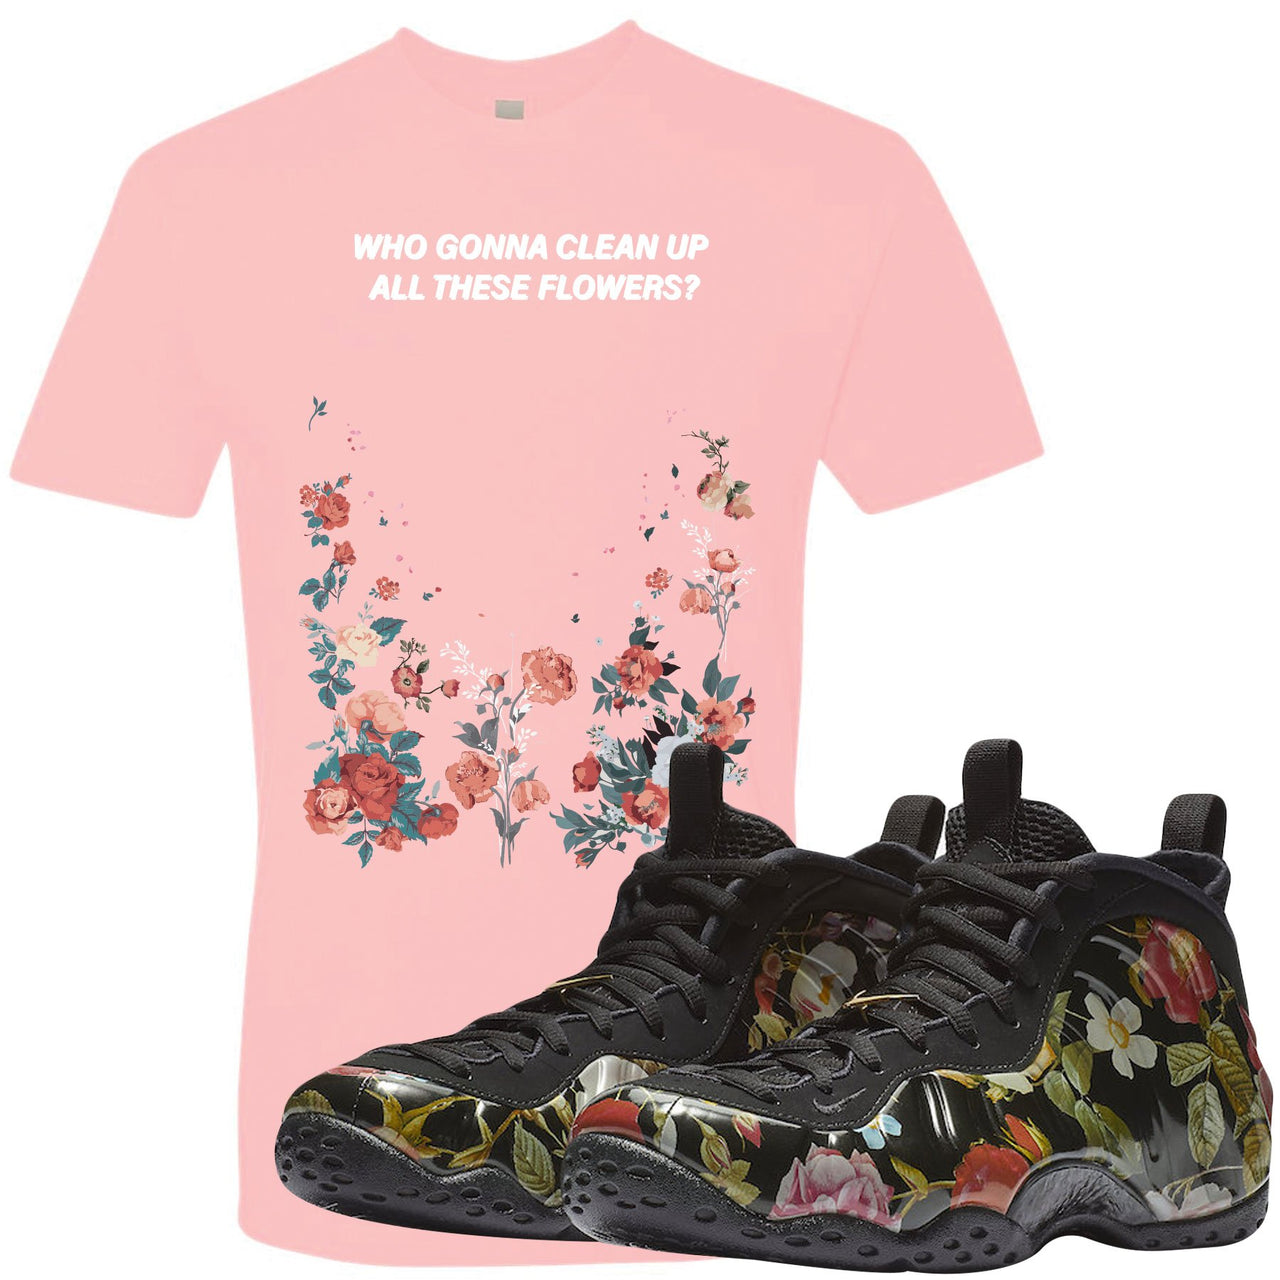 Floral One Foams T Shirt | Who Gonna Clean Up All These Flowers, Pink